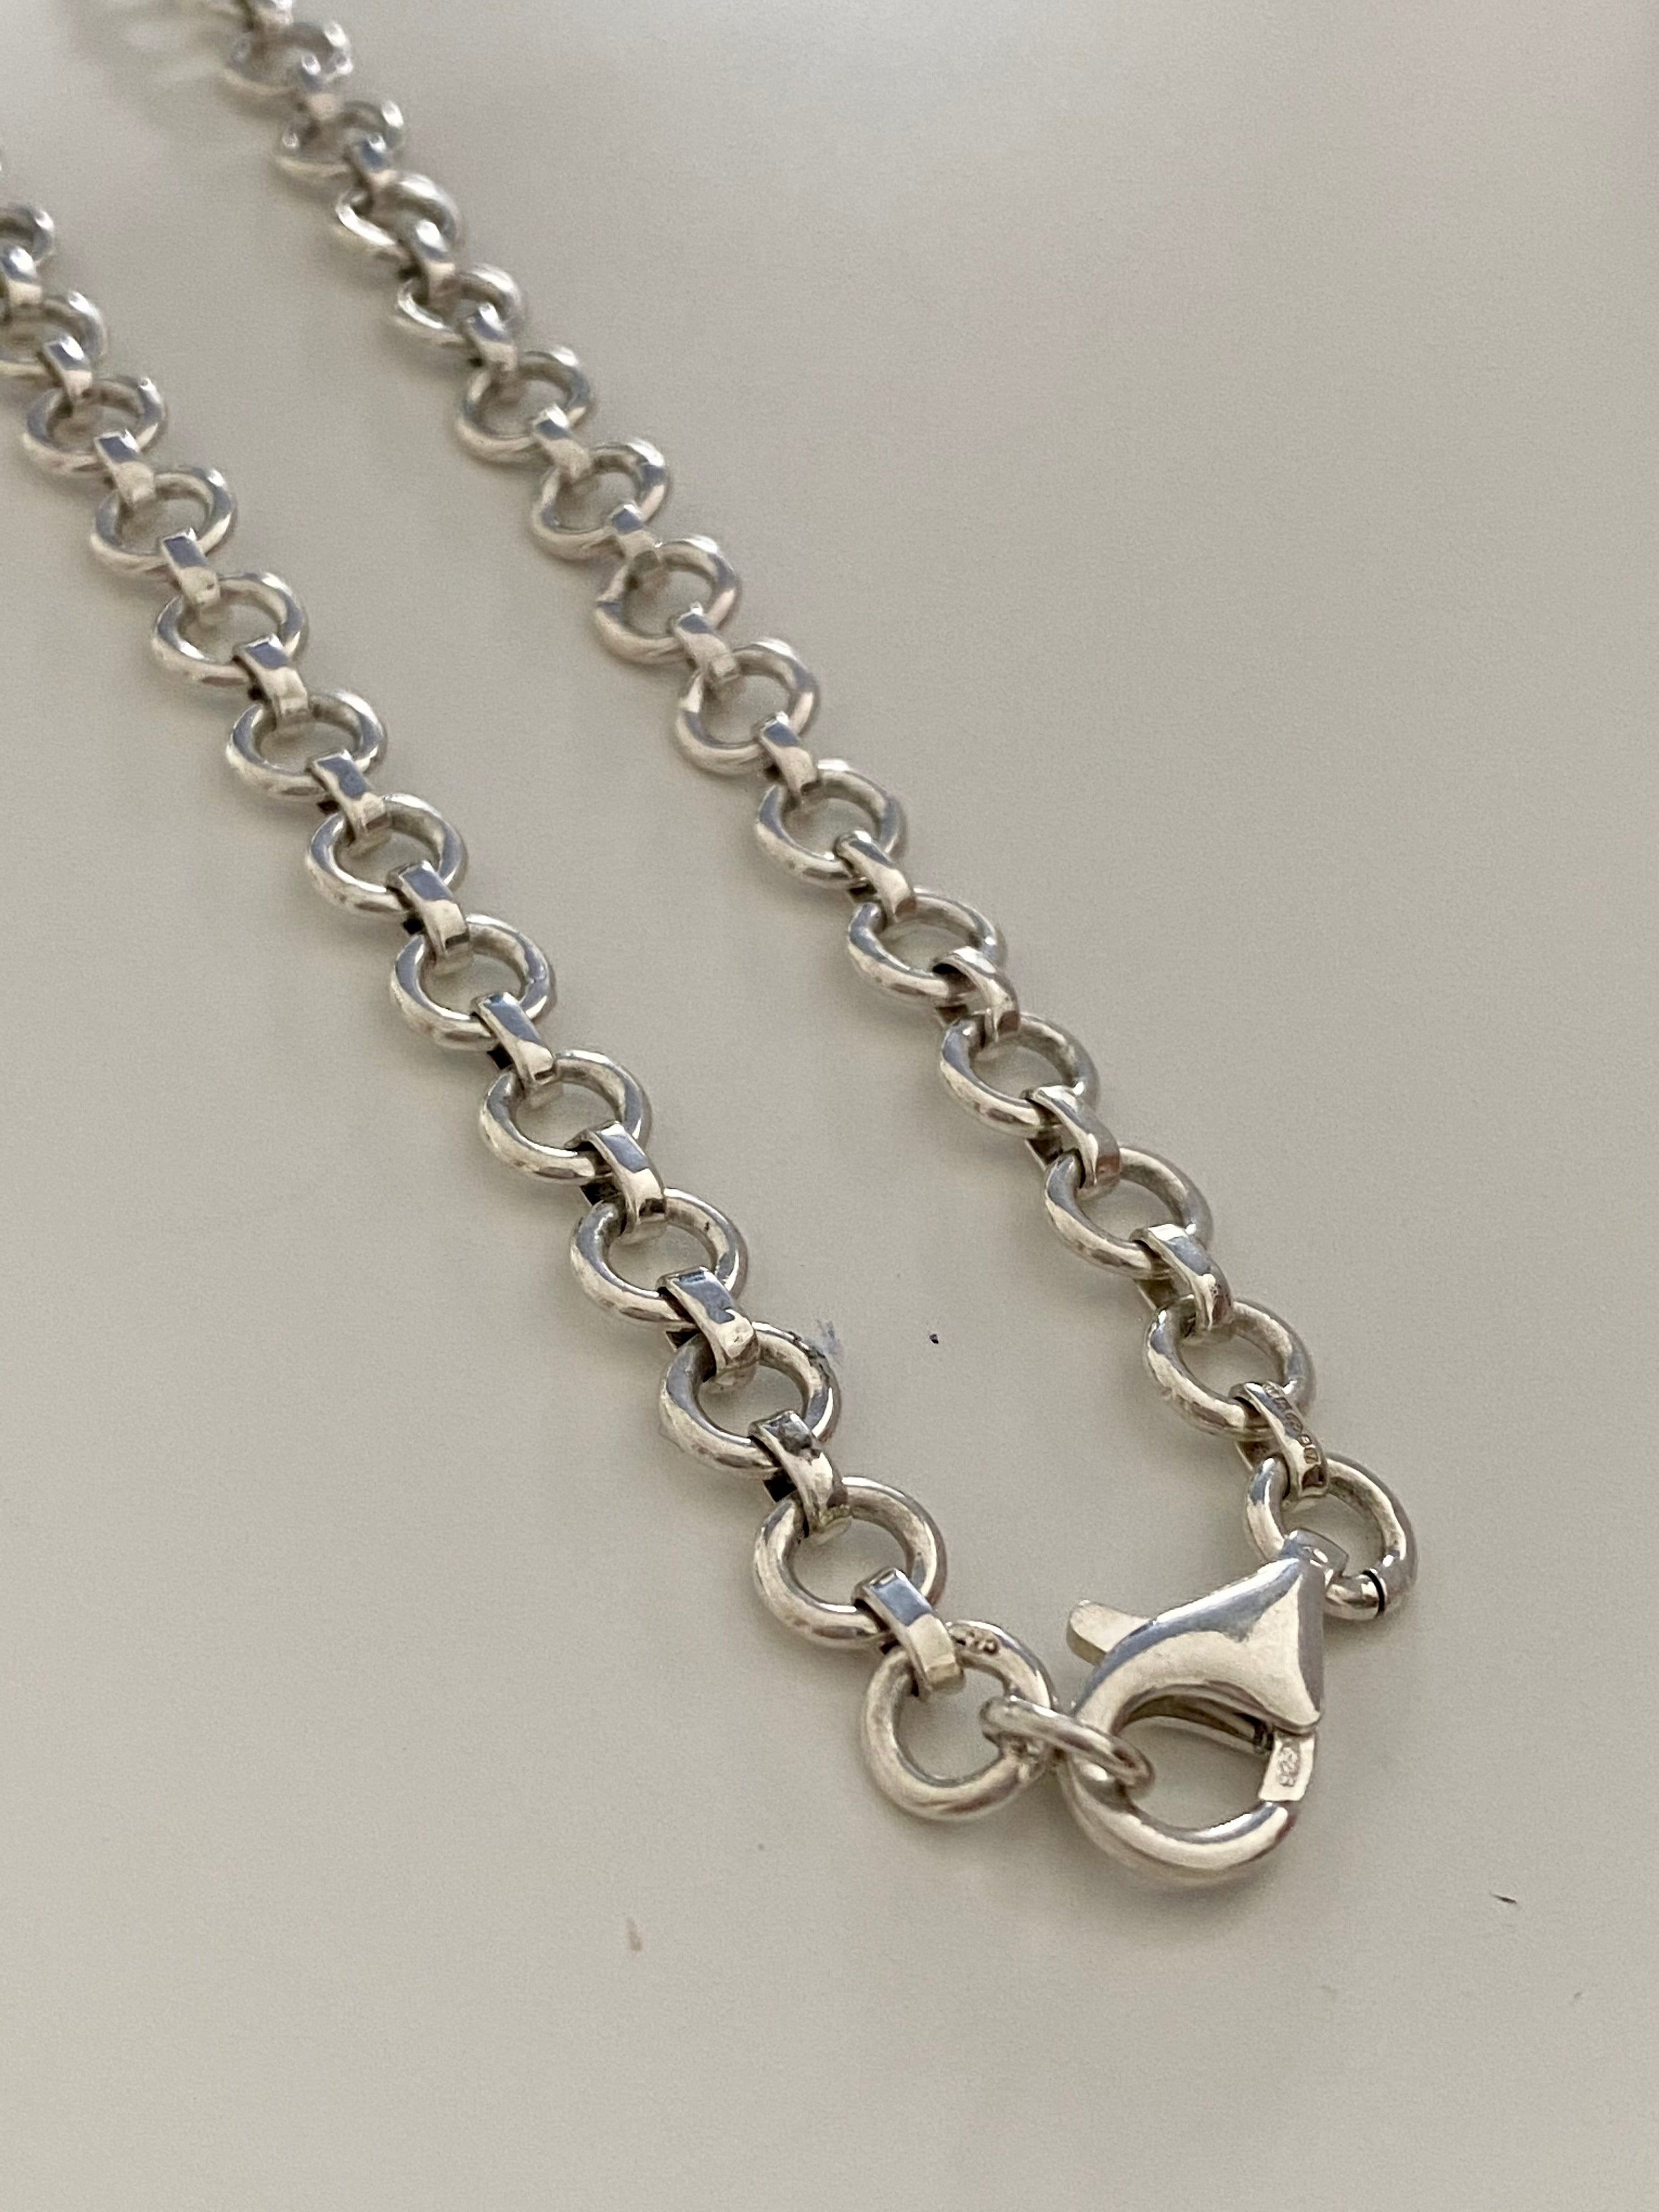 Statement Sterling Silver Necklace with small round links